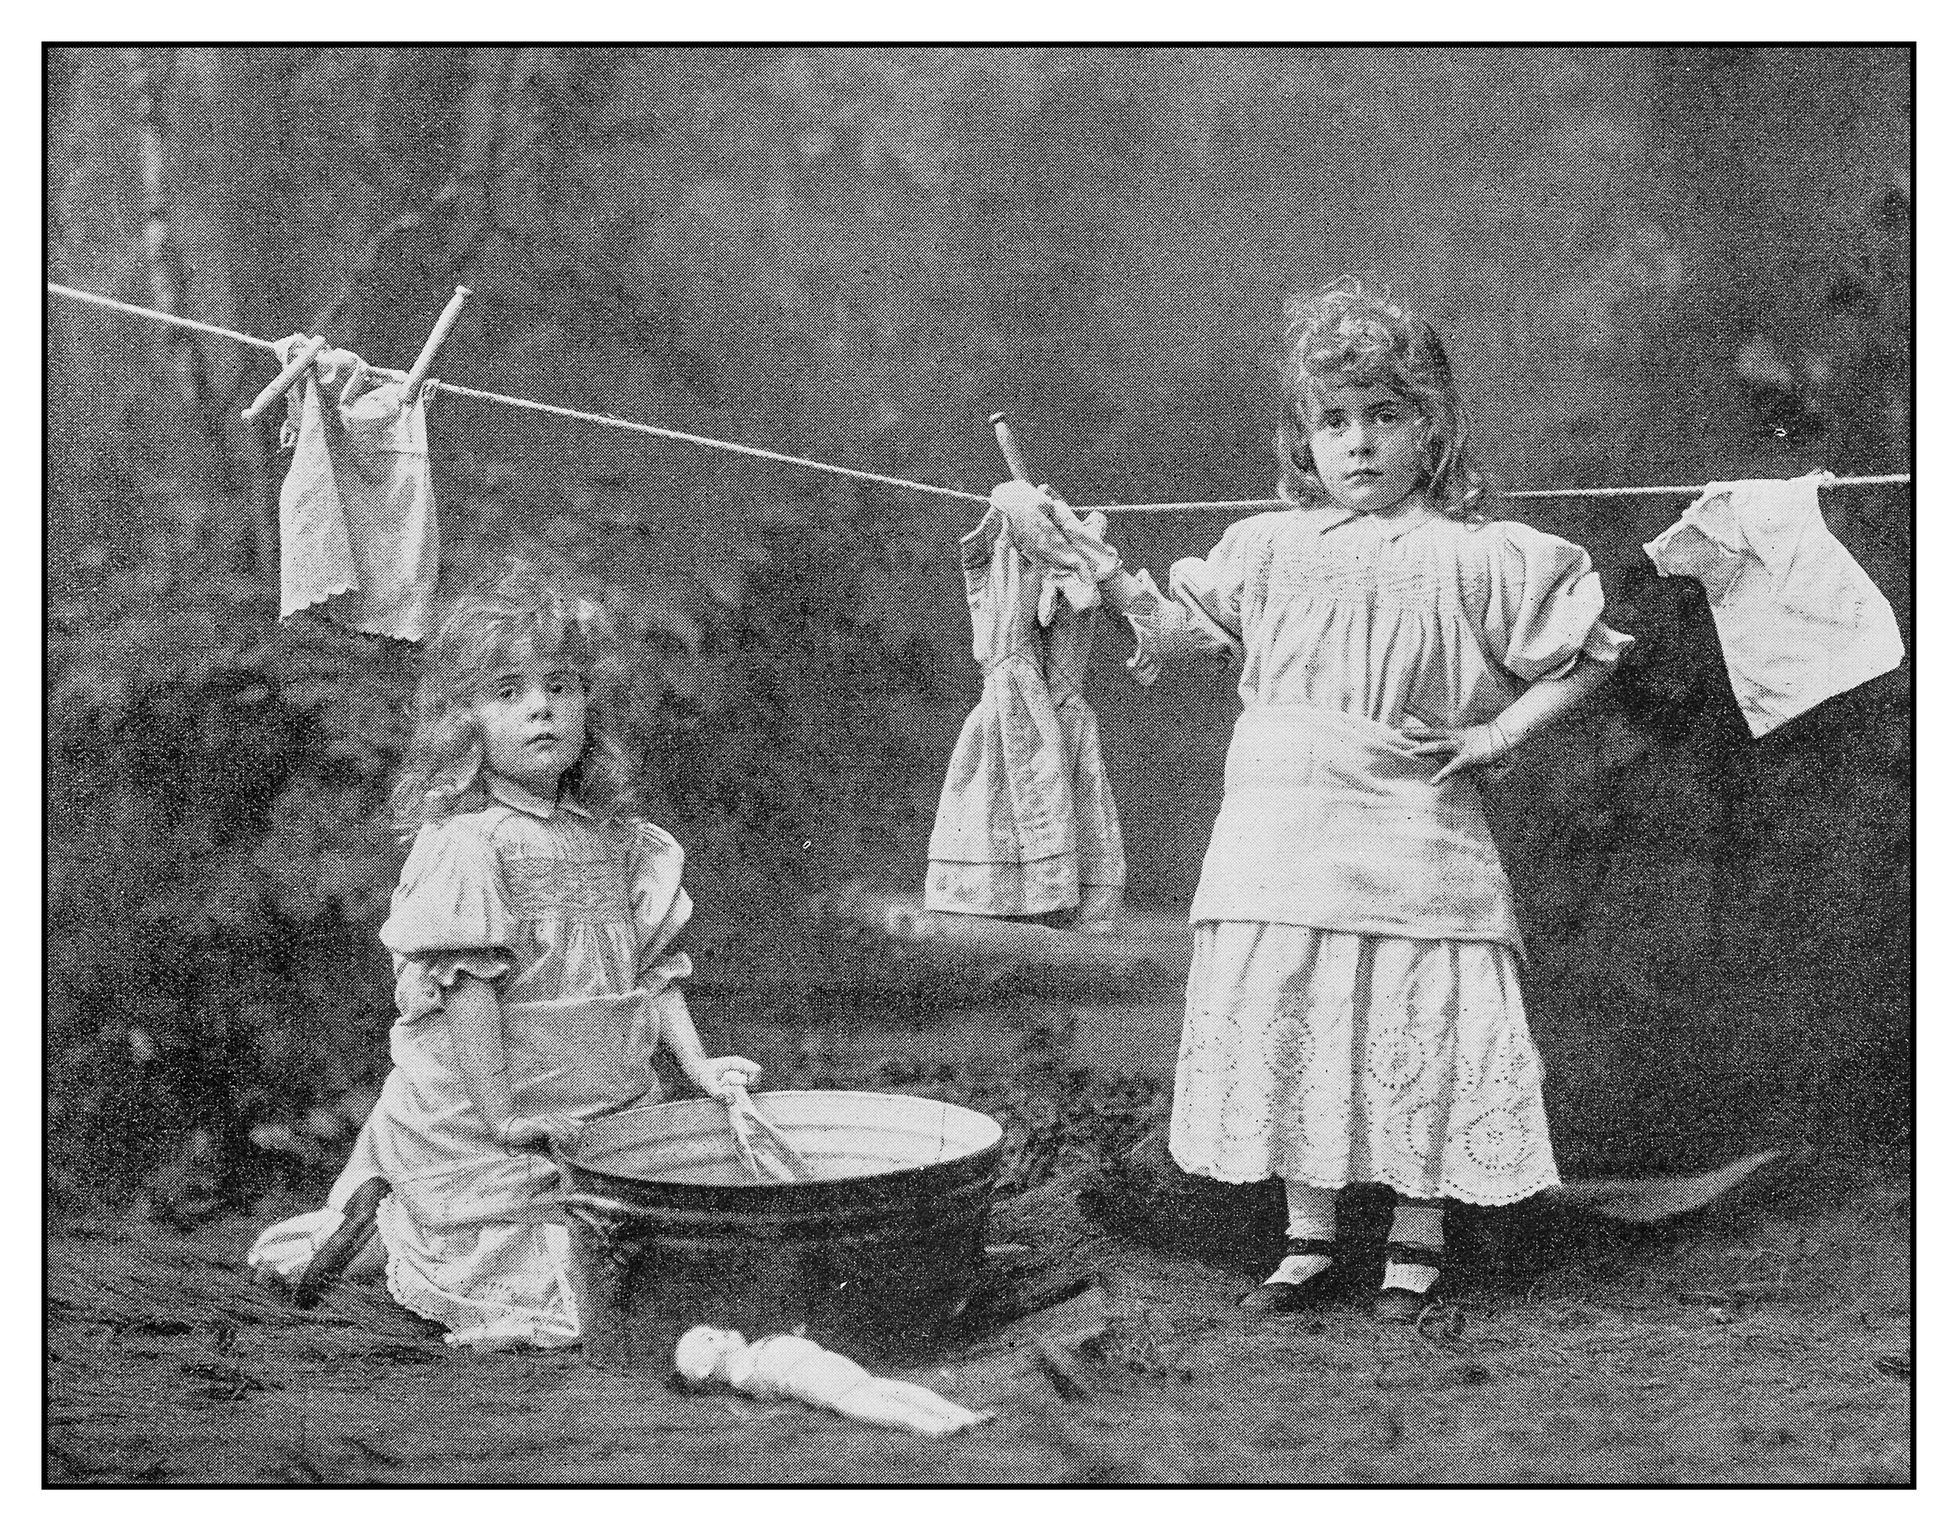 Victorian girls washing their dolls clothes – a far easier task than what lay ahead for many